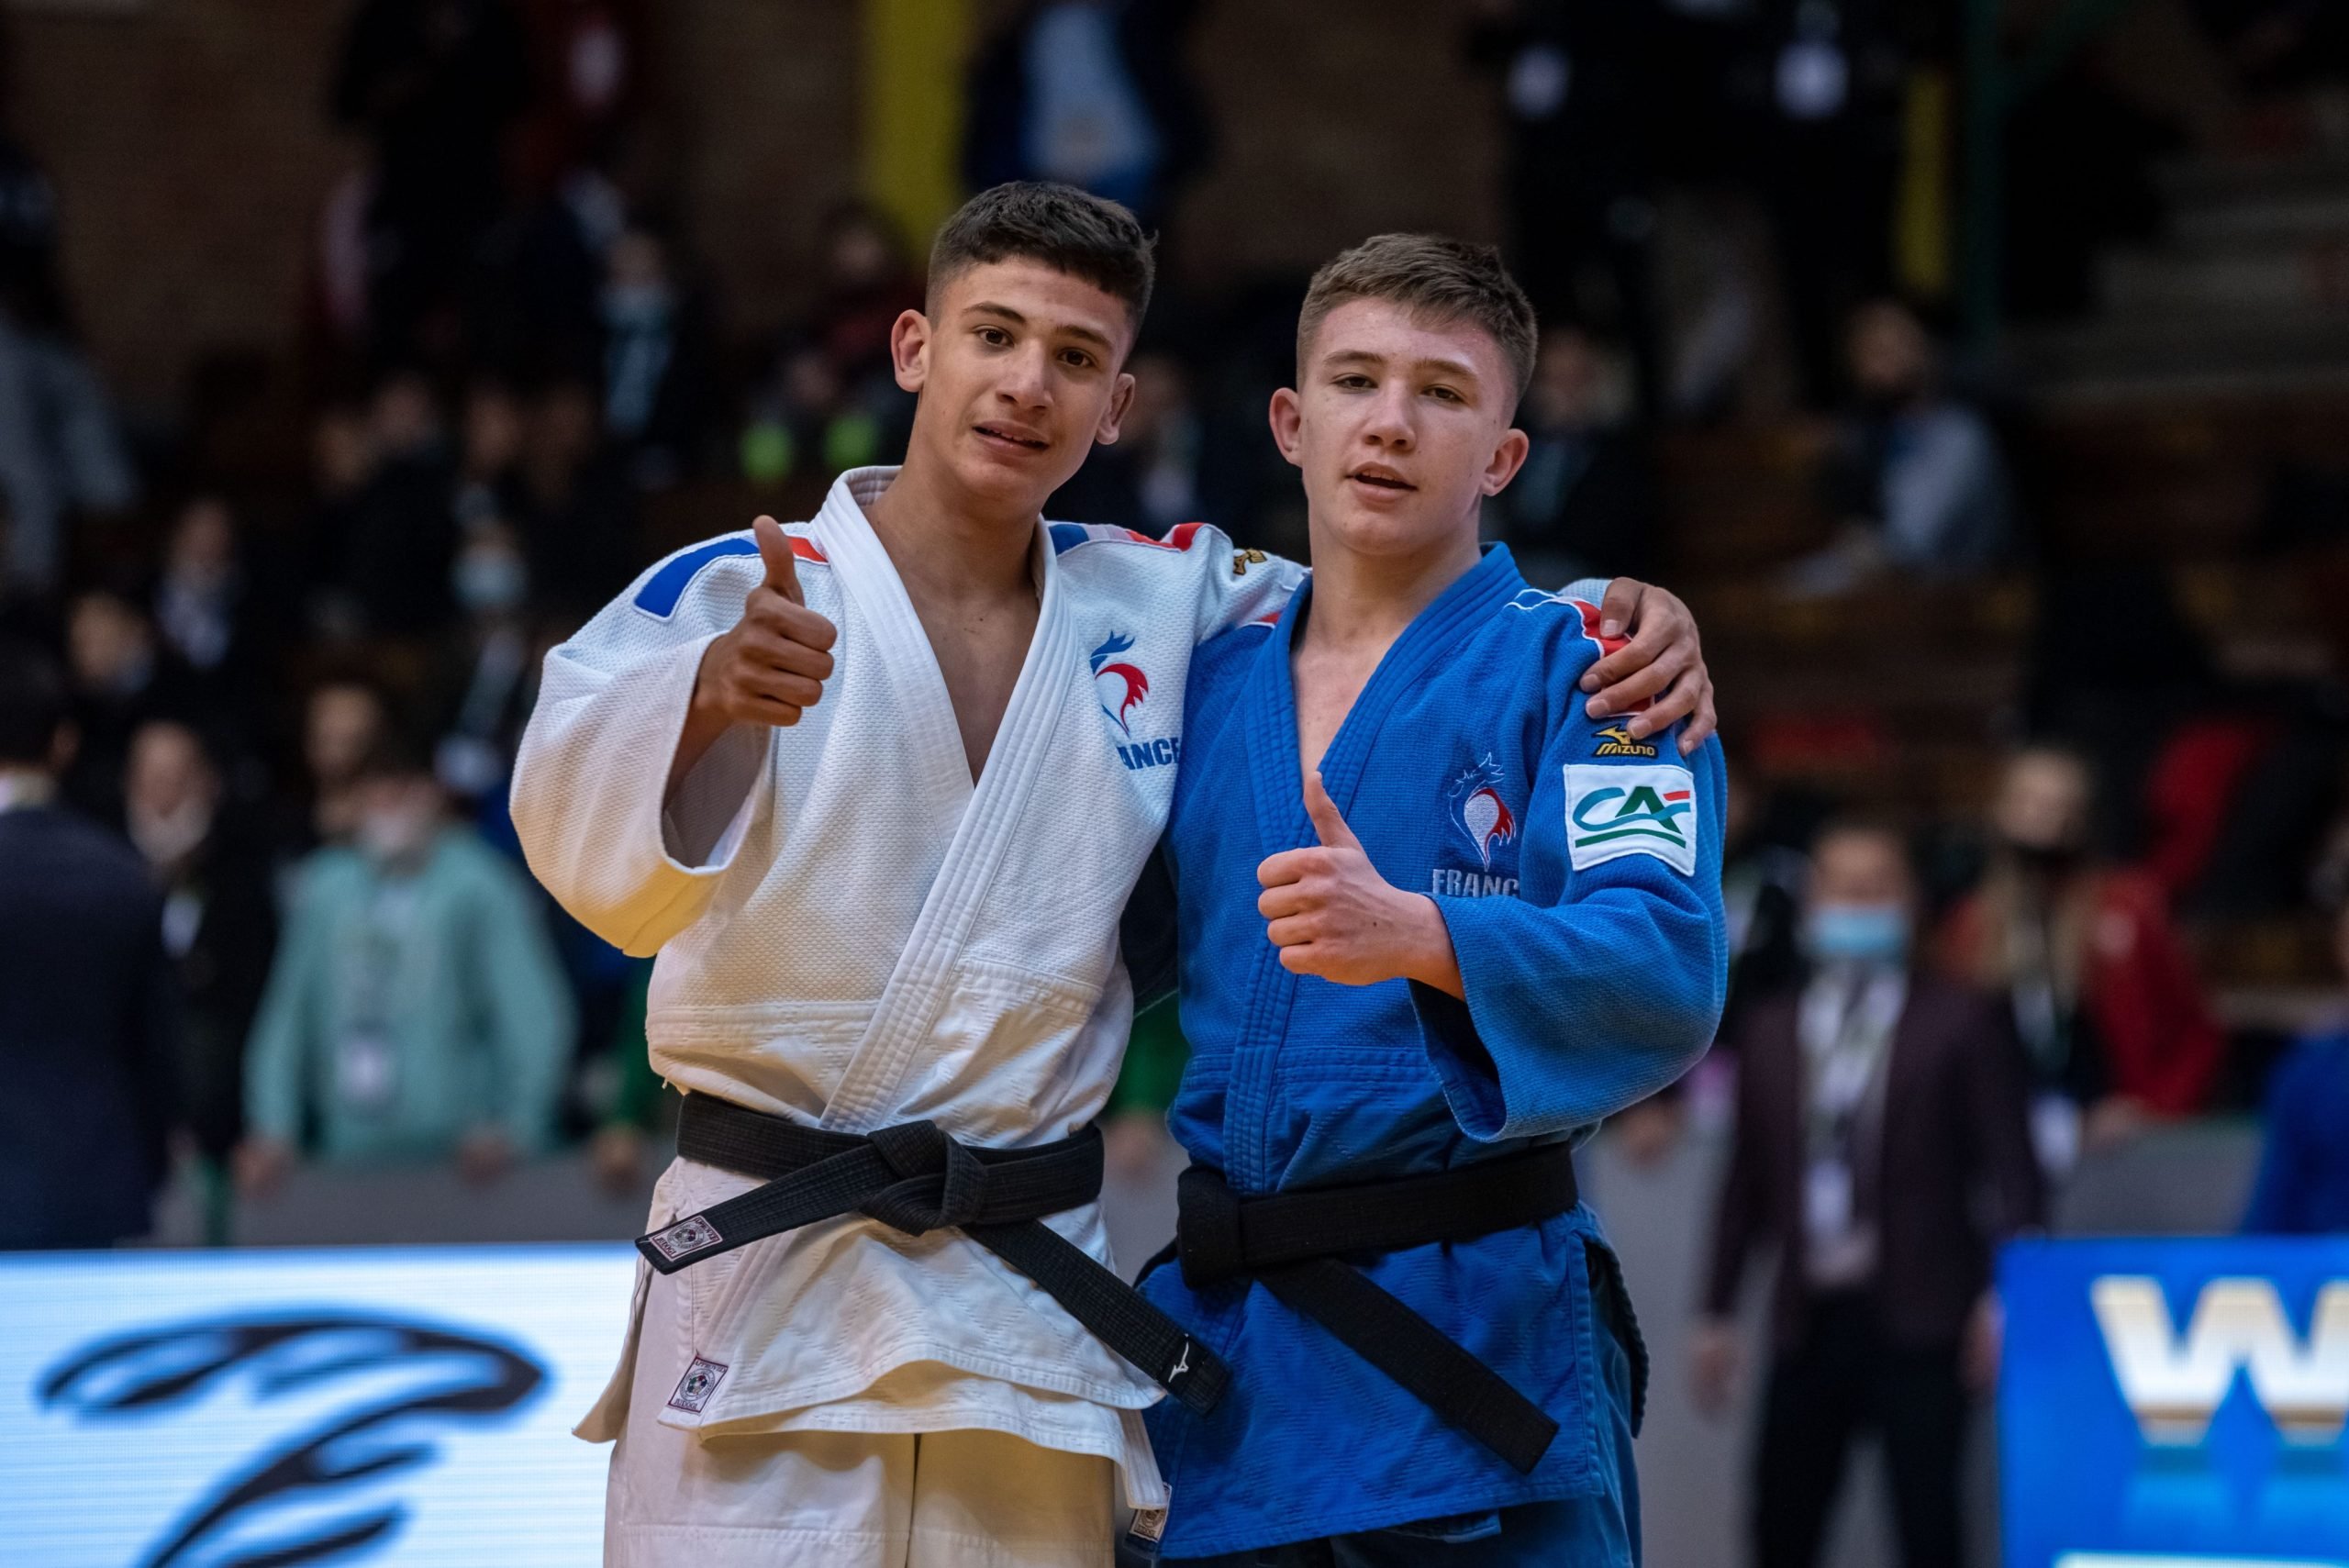 FRENCH CADETS DOMINATED IN A GREAT ZAGREB CADET EUROPEAN CUP 2022